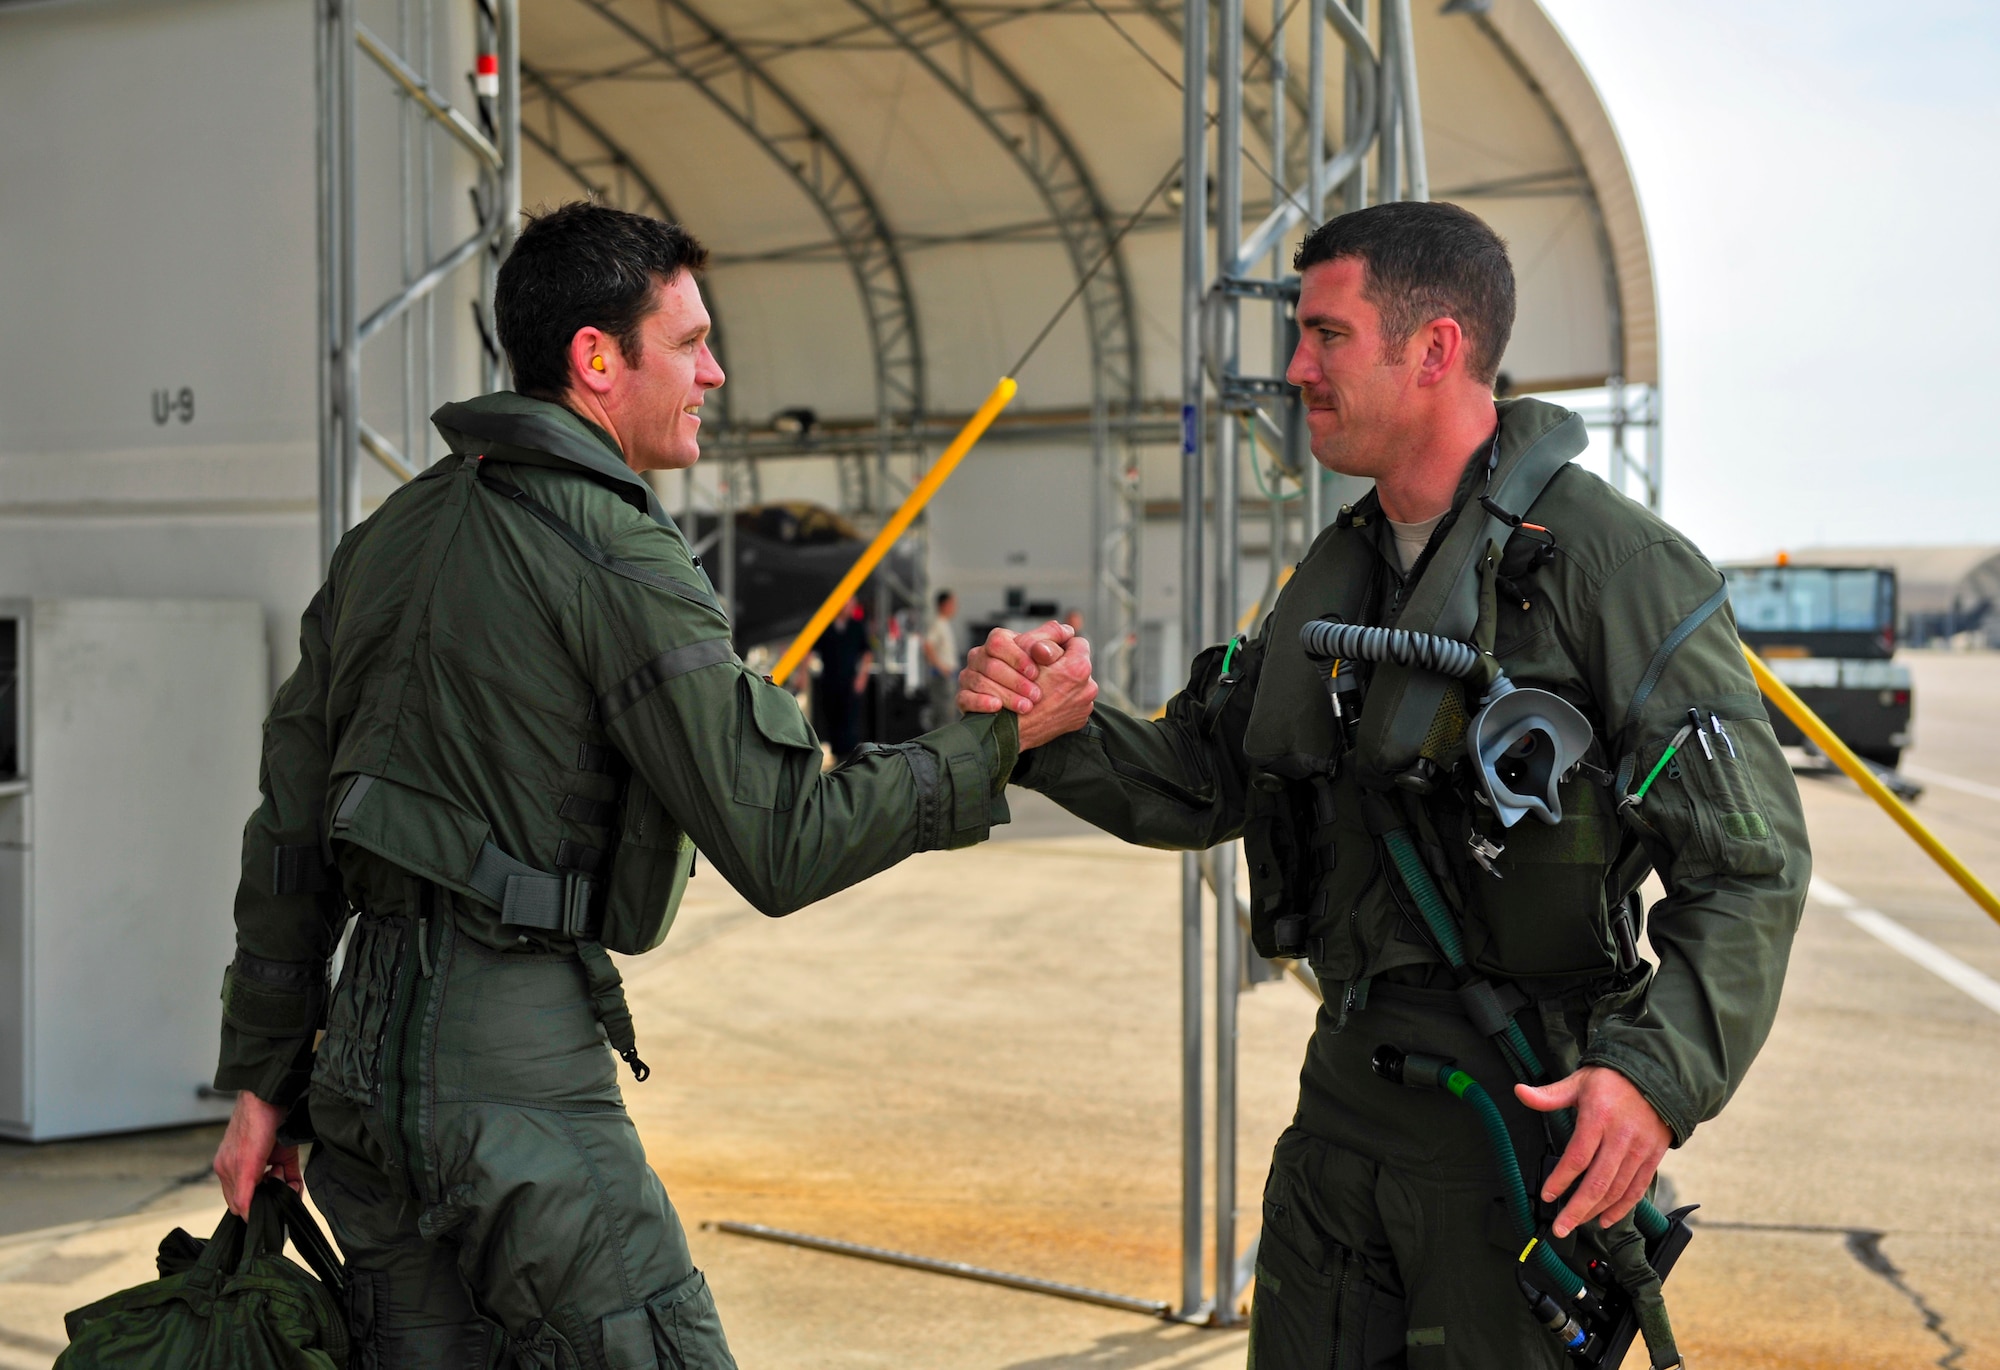 Royal Australian Air Force Squadron Leader Andrew Jackson, F-35 Lightning II student pilot, left, is congratulated by Lt. Col. Matthew Renbarger, 58th Fighter Squadron commander, after completing his first flight on Eglin Air Force Base, Fla., March 18, 2015. Renbarger flew as Jackson’s instructor pilot and guided him throughout the flight. After Jackson completes his training at Eglin AFB, he will go to Luke Air Force Base, Ariz., to be in instructor pilot at the international pilot center. (U.S. Air Force photo/Staff Sgt. Marleah Robertson)